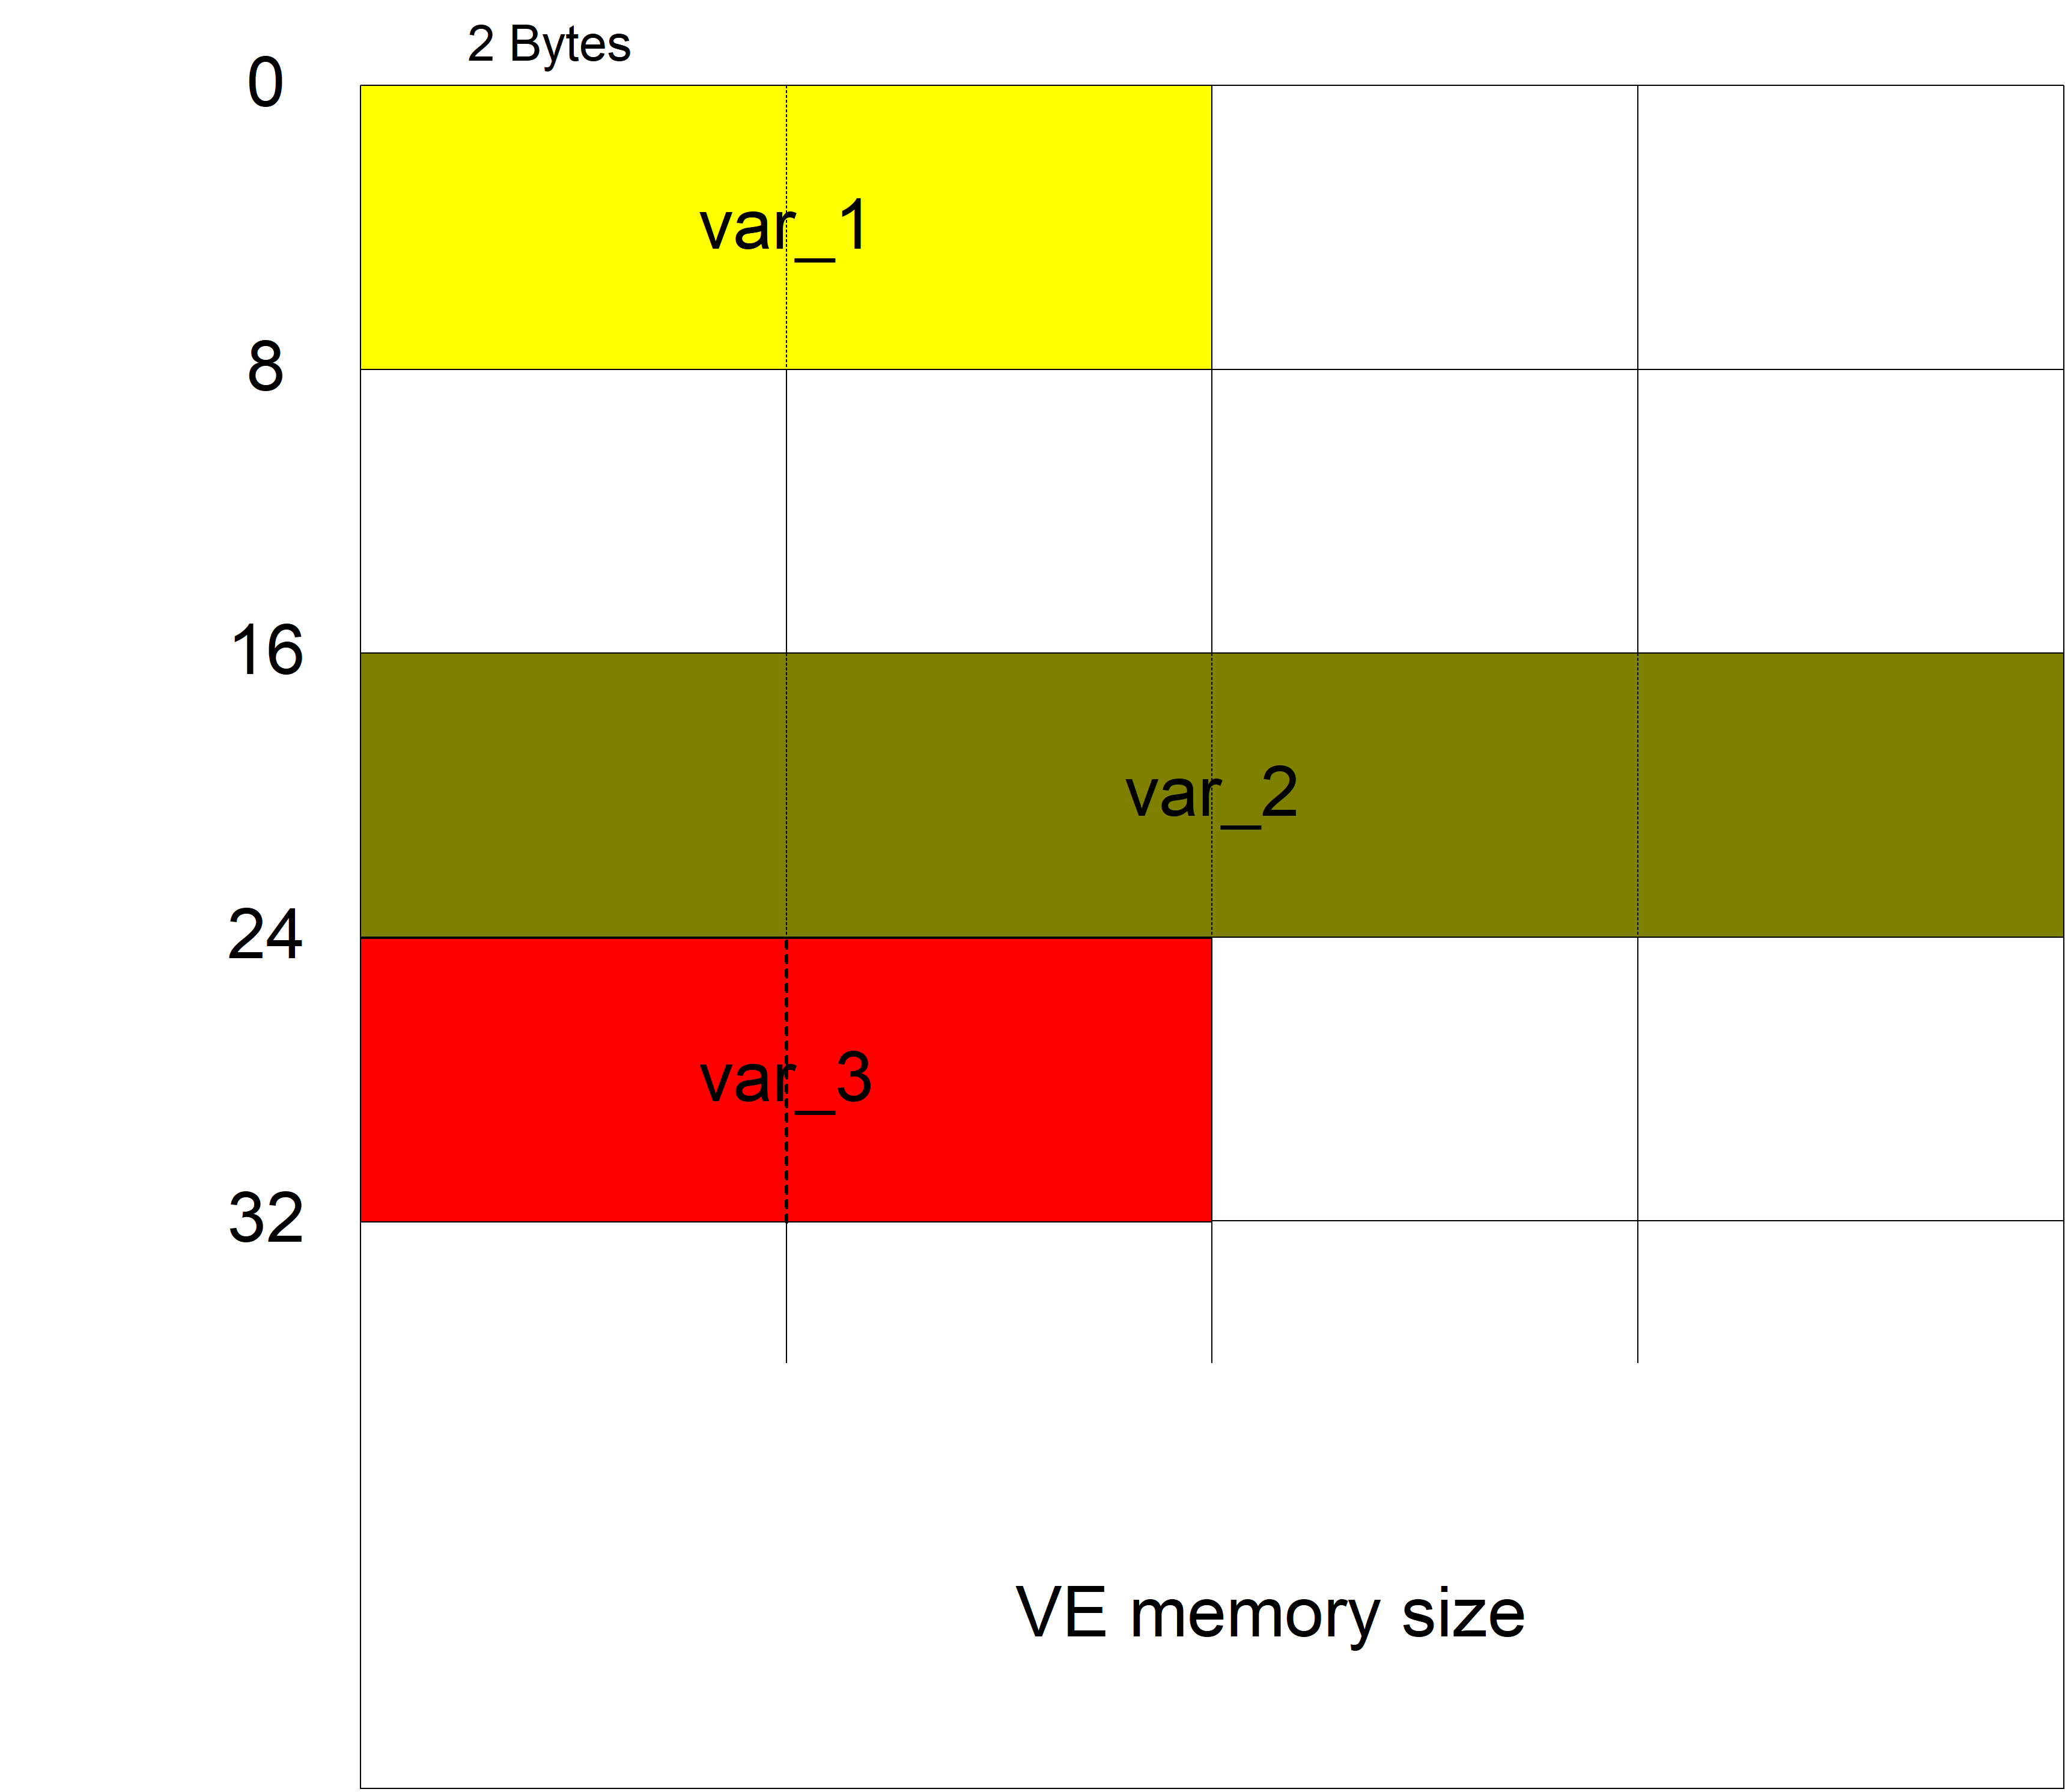 Resulting memory layout: